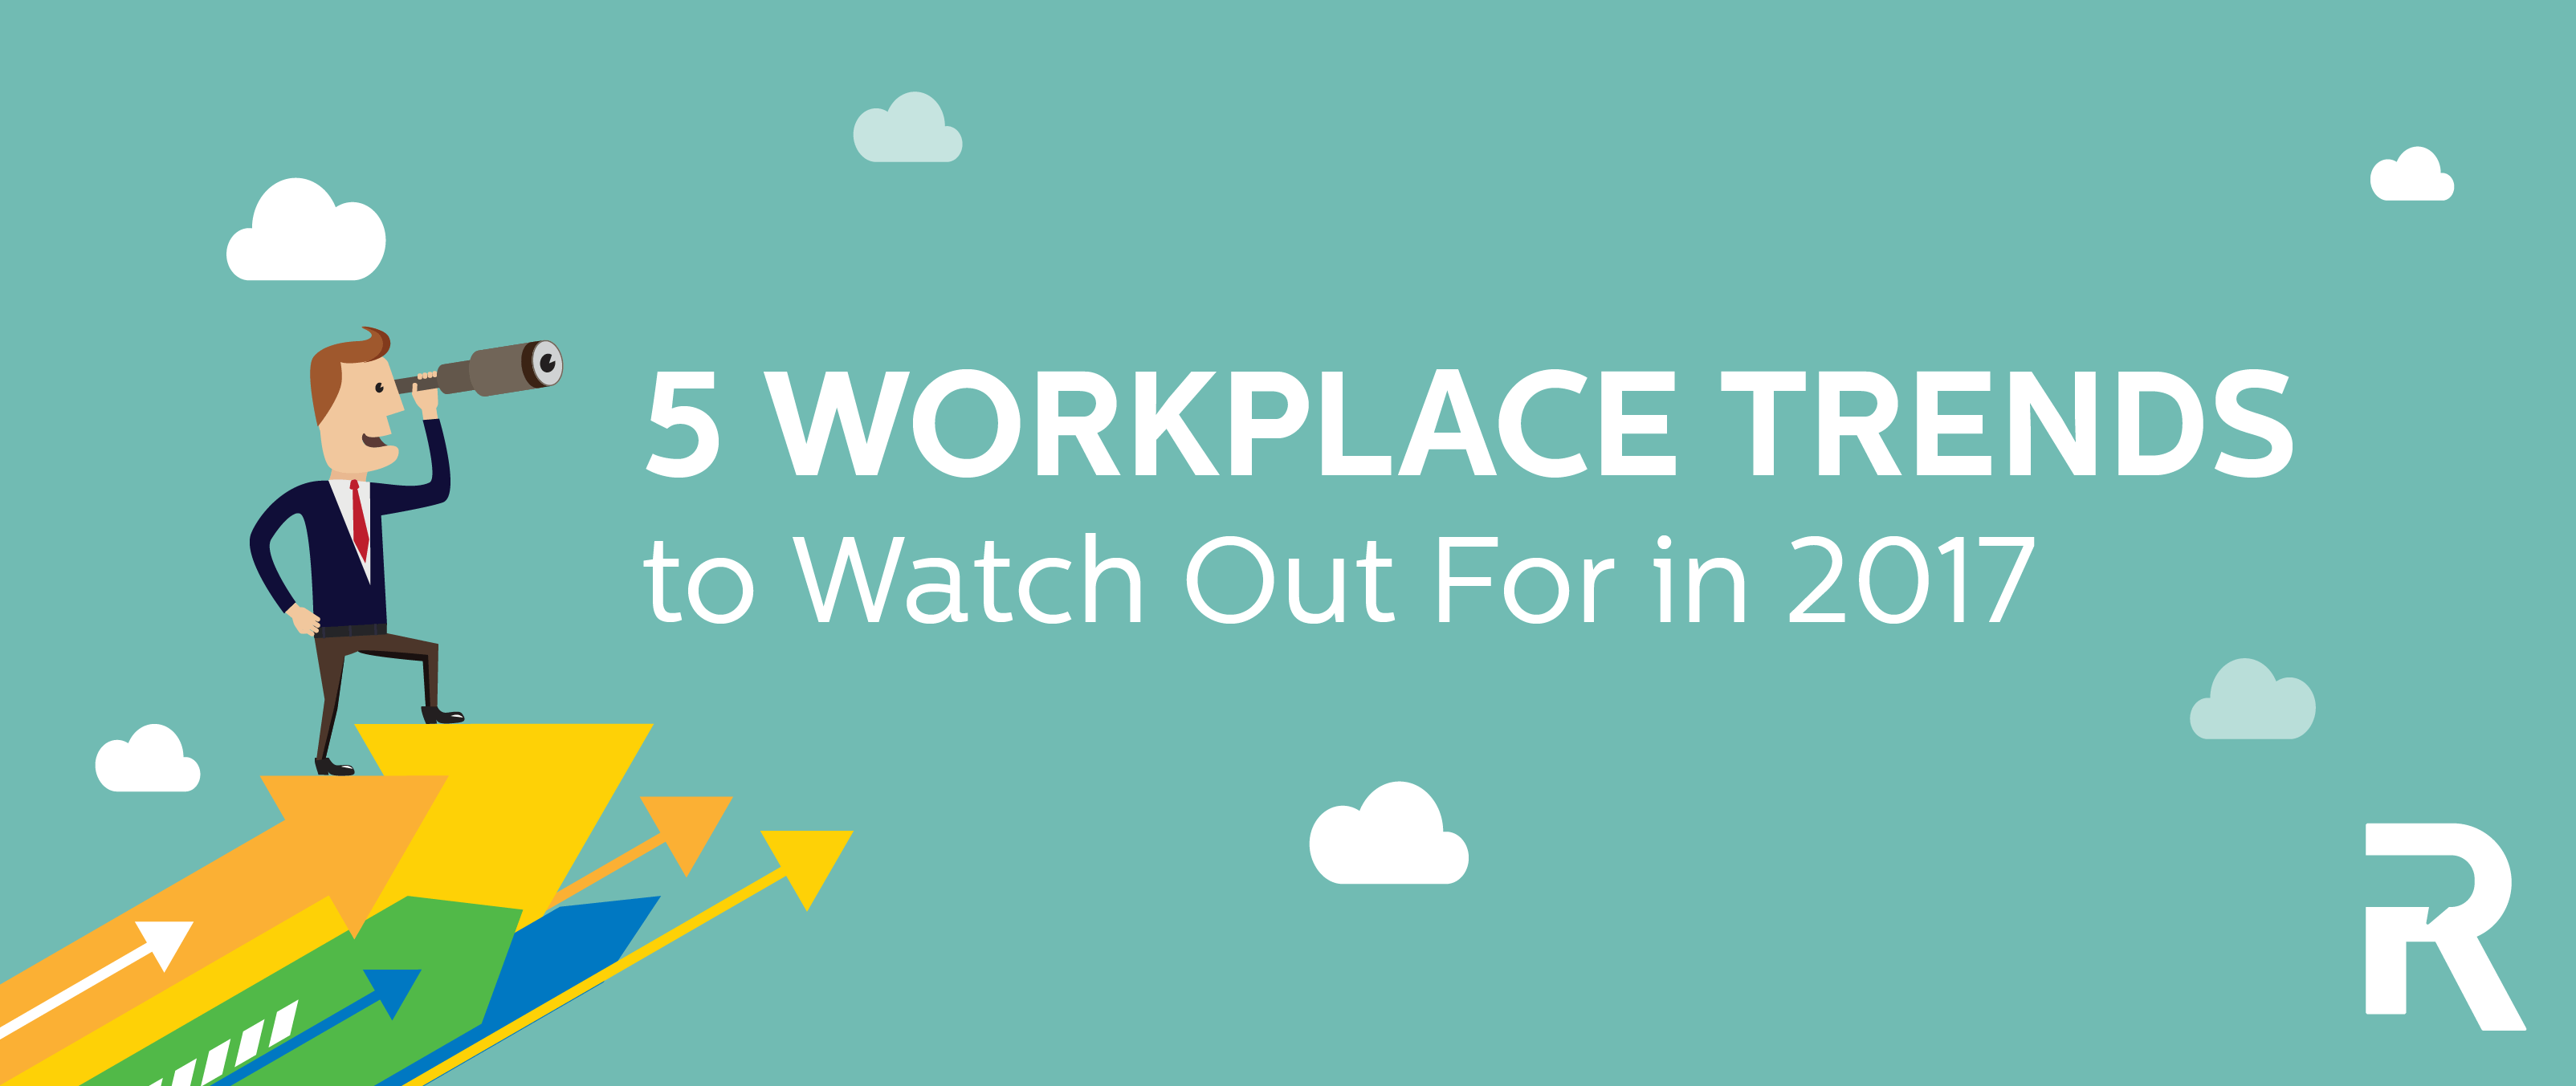 5 Workplace Trends to Watch Out For in 2017